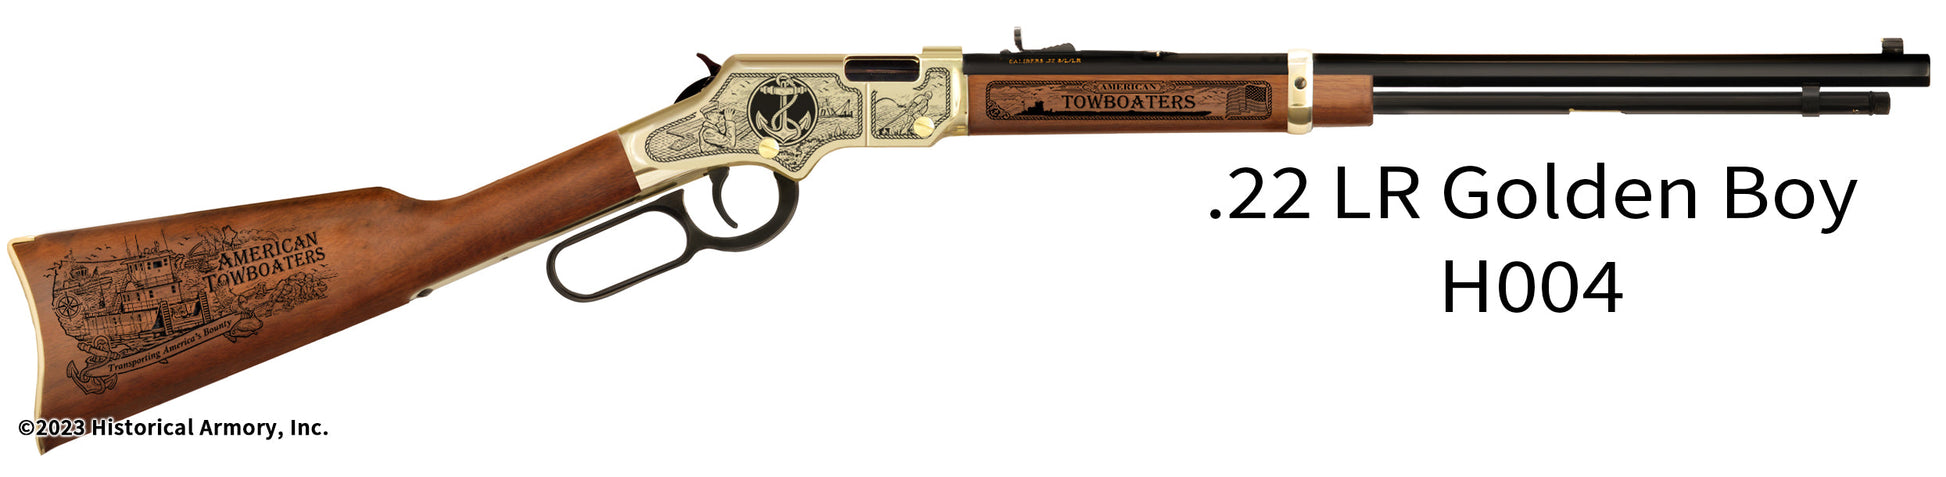 American Towboaters Limited Edition Engraved Henry .22 LR H004 Golden Boy Rifle